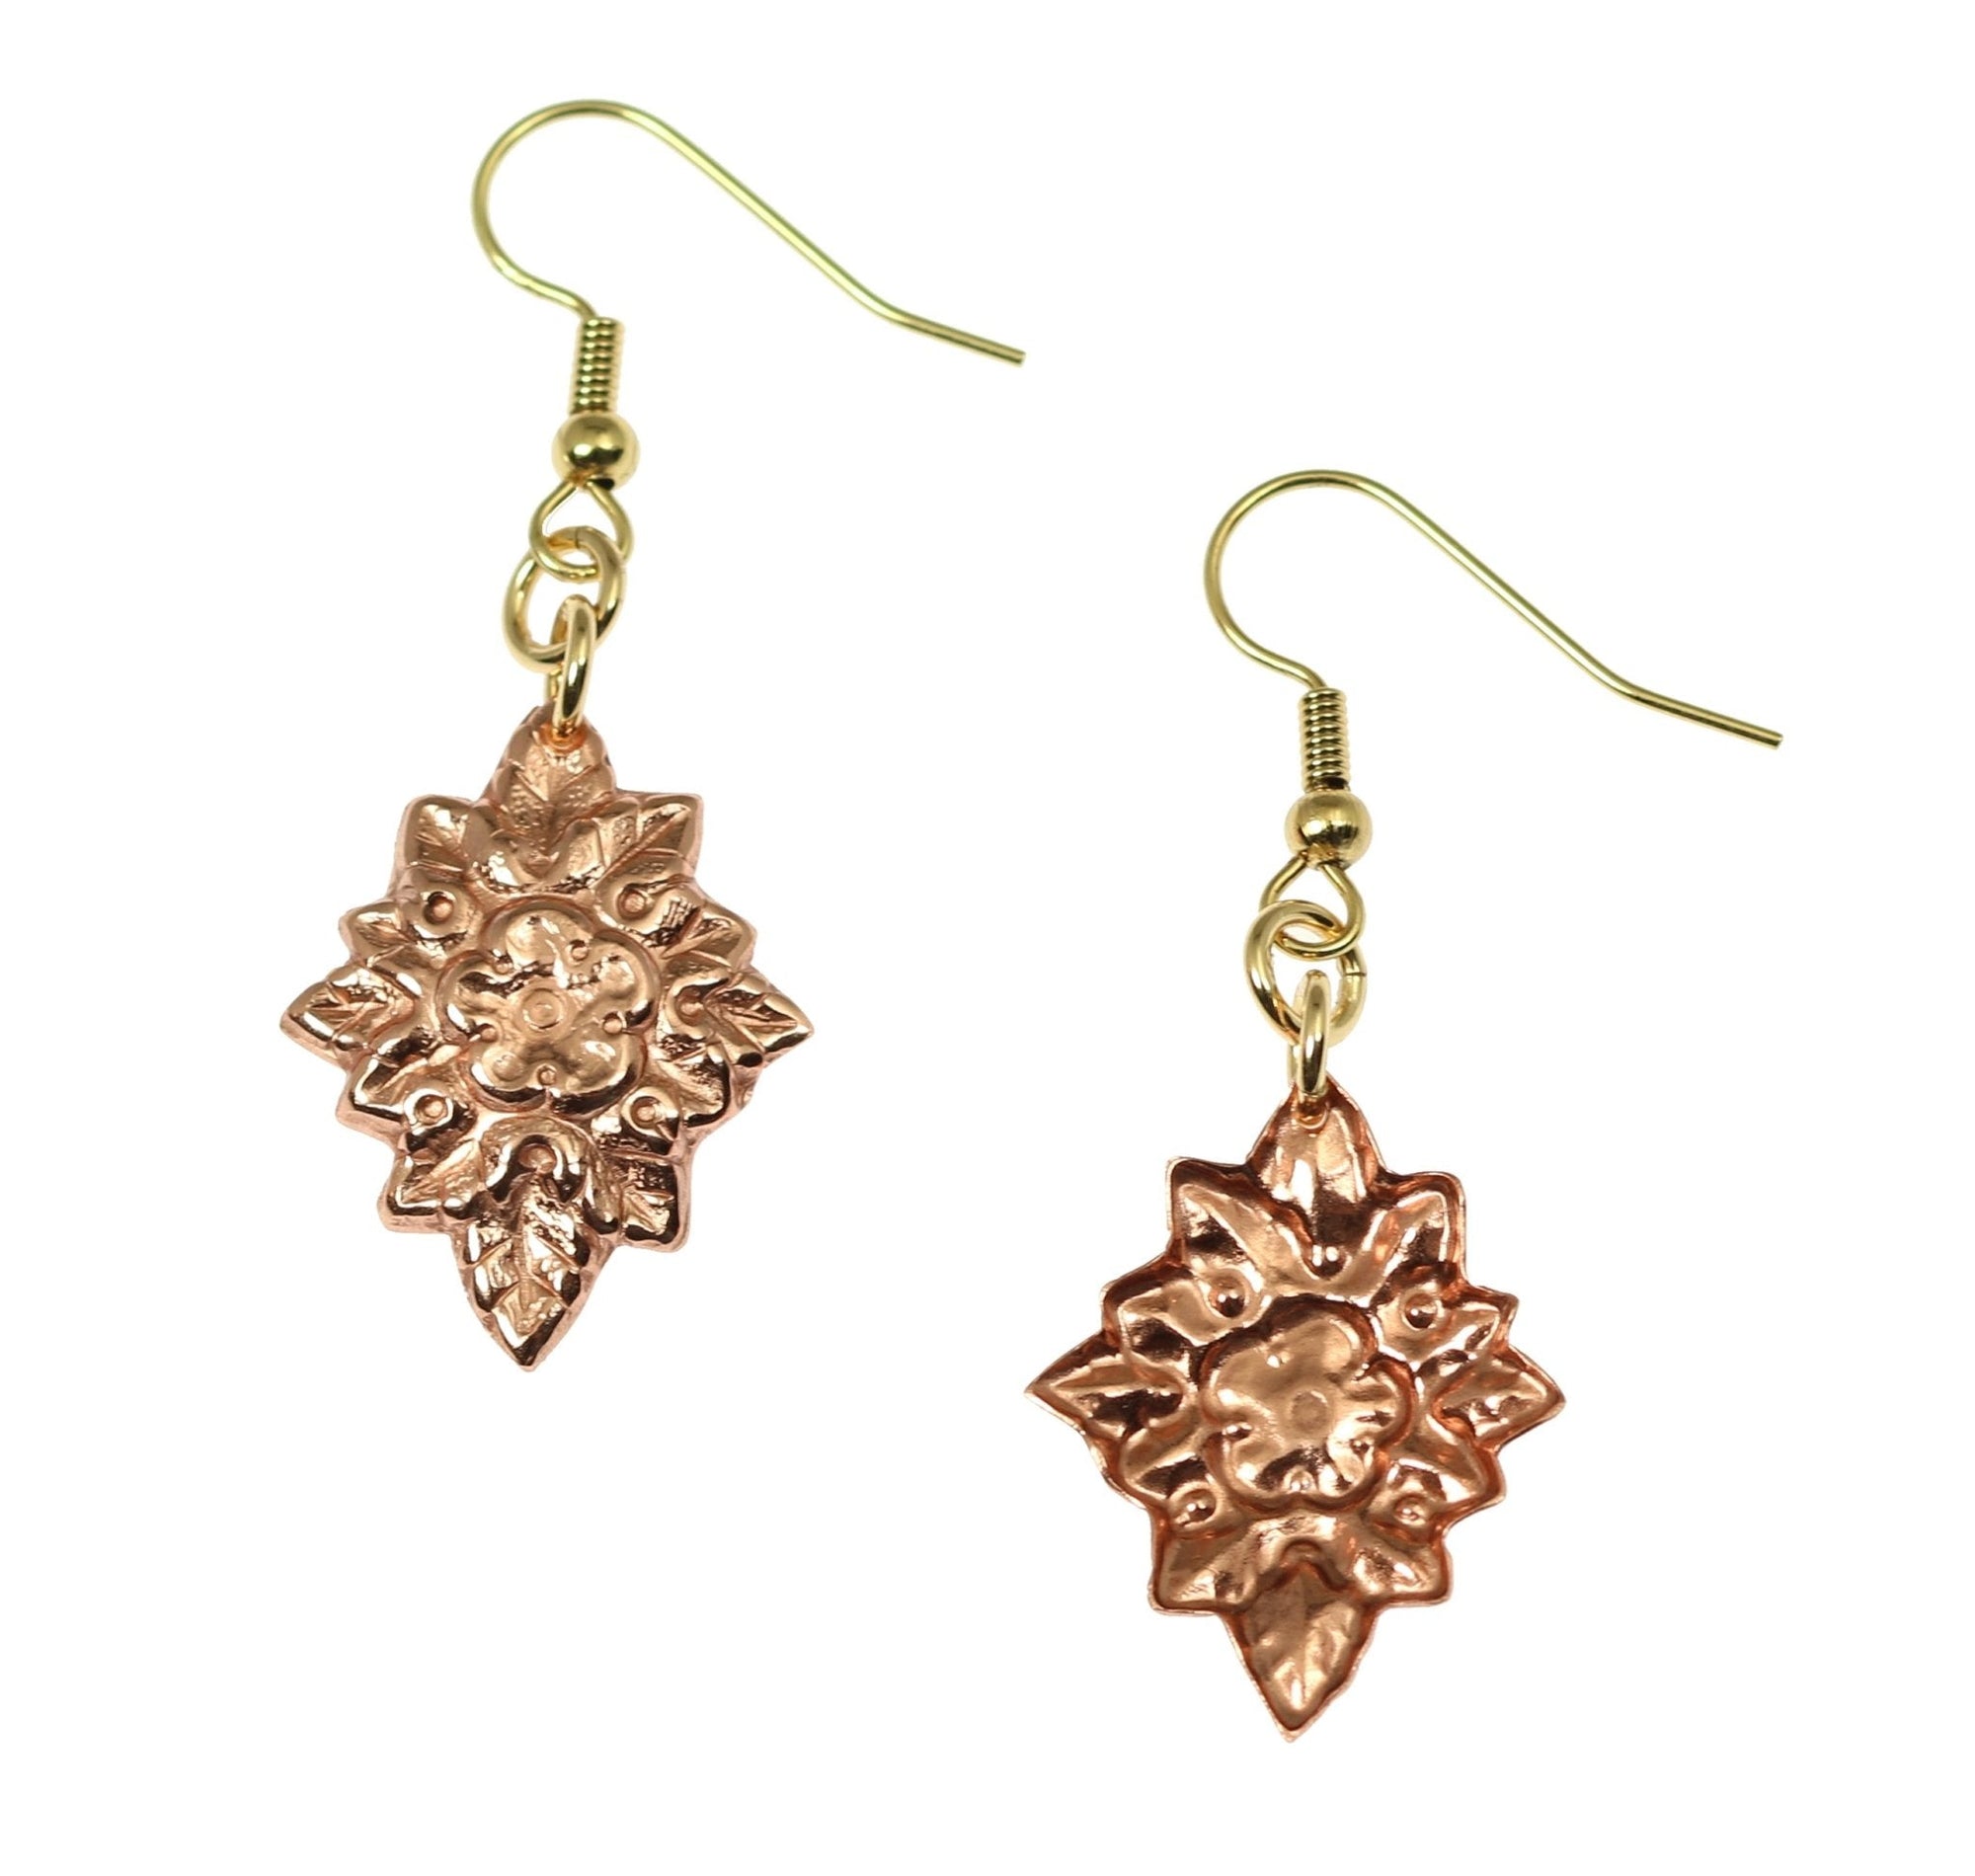 Detail View of French Bouquet Copper Drop Earrings